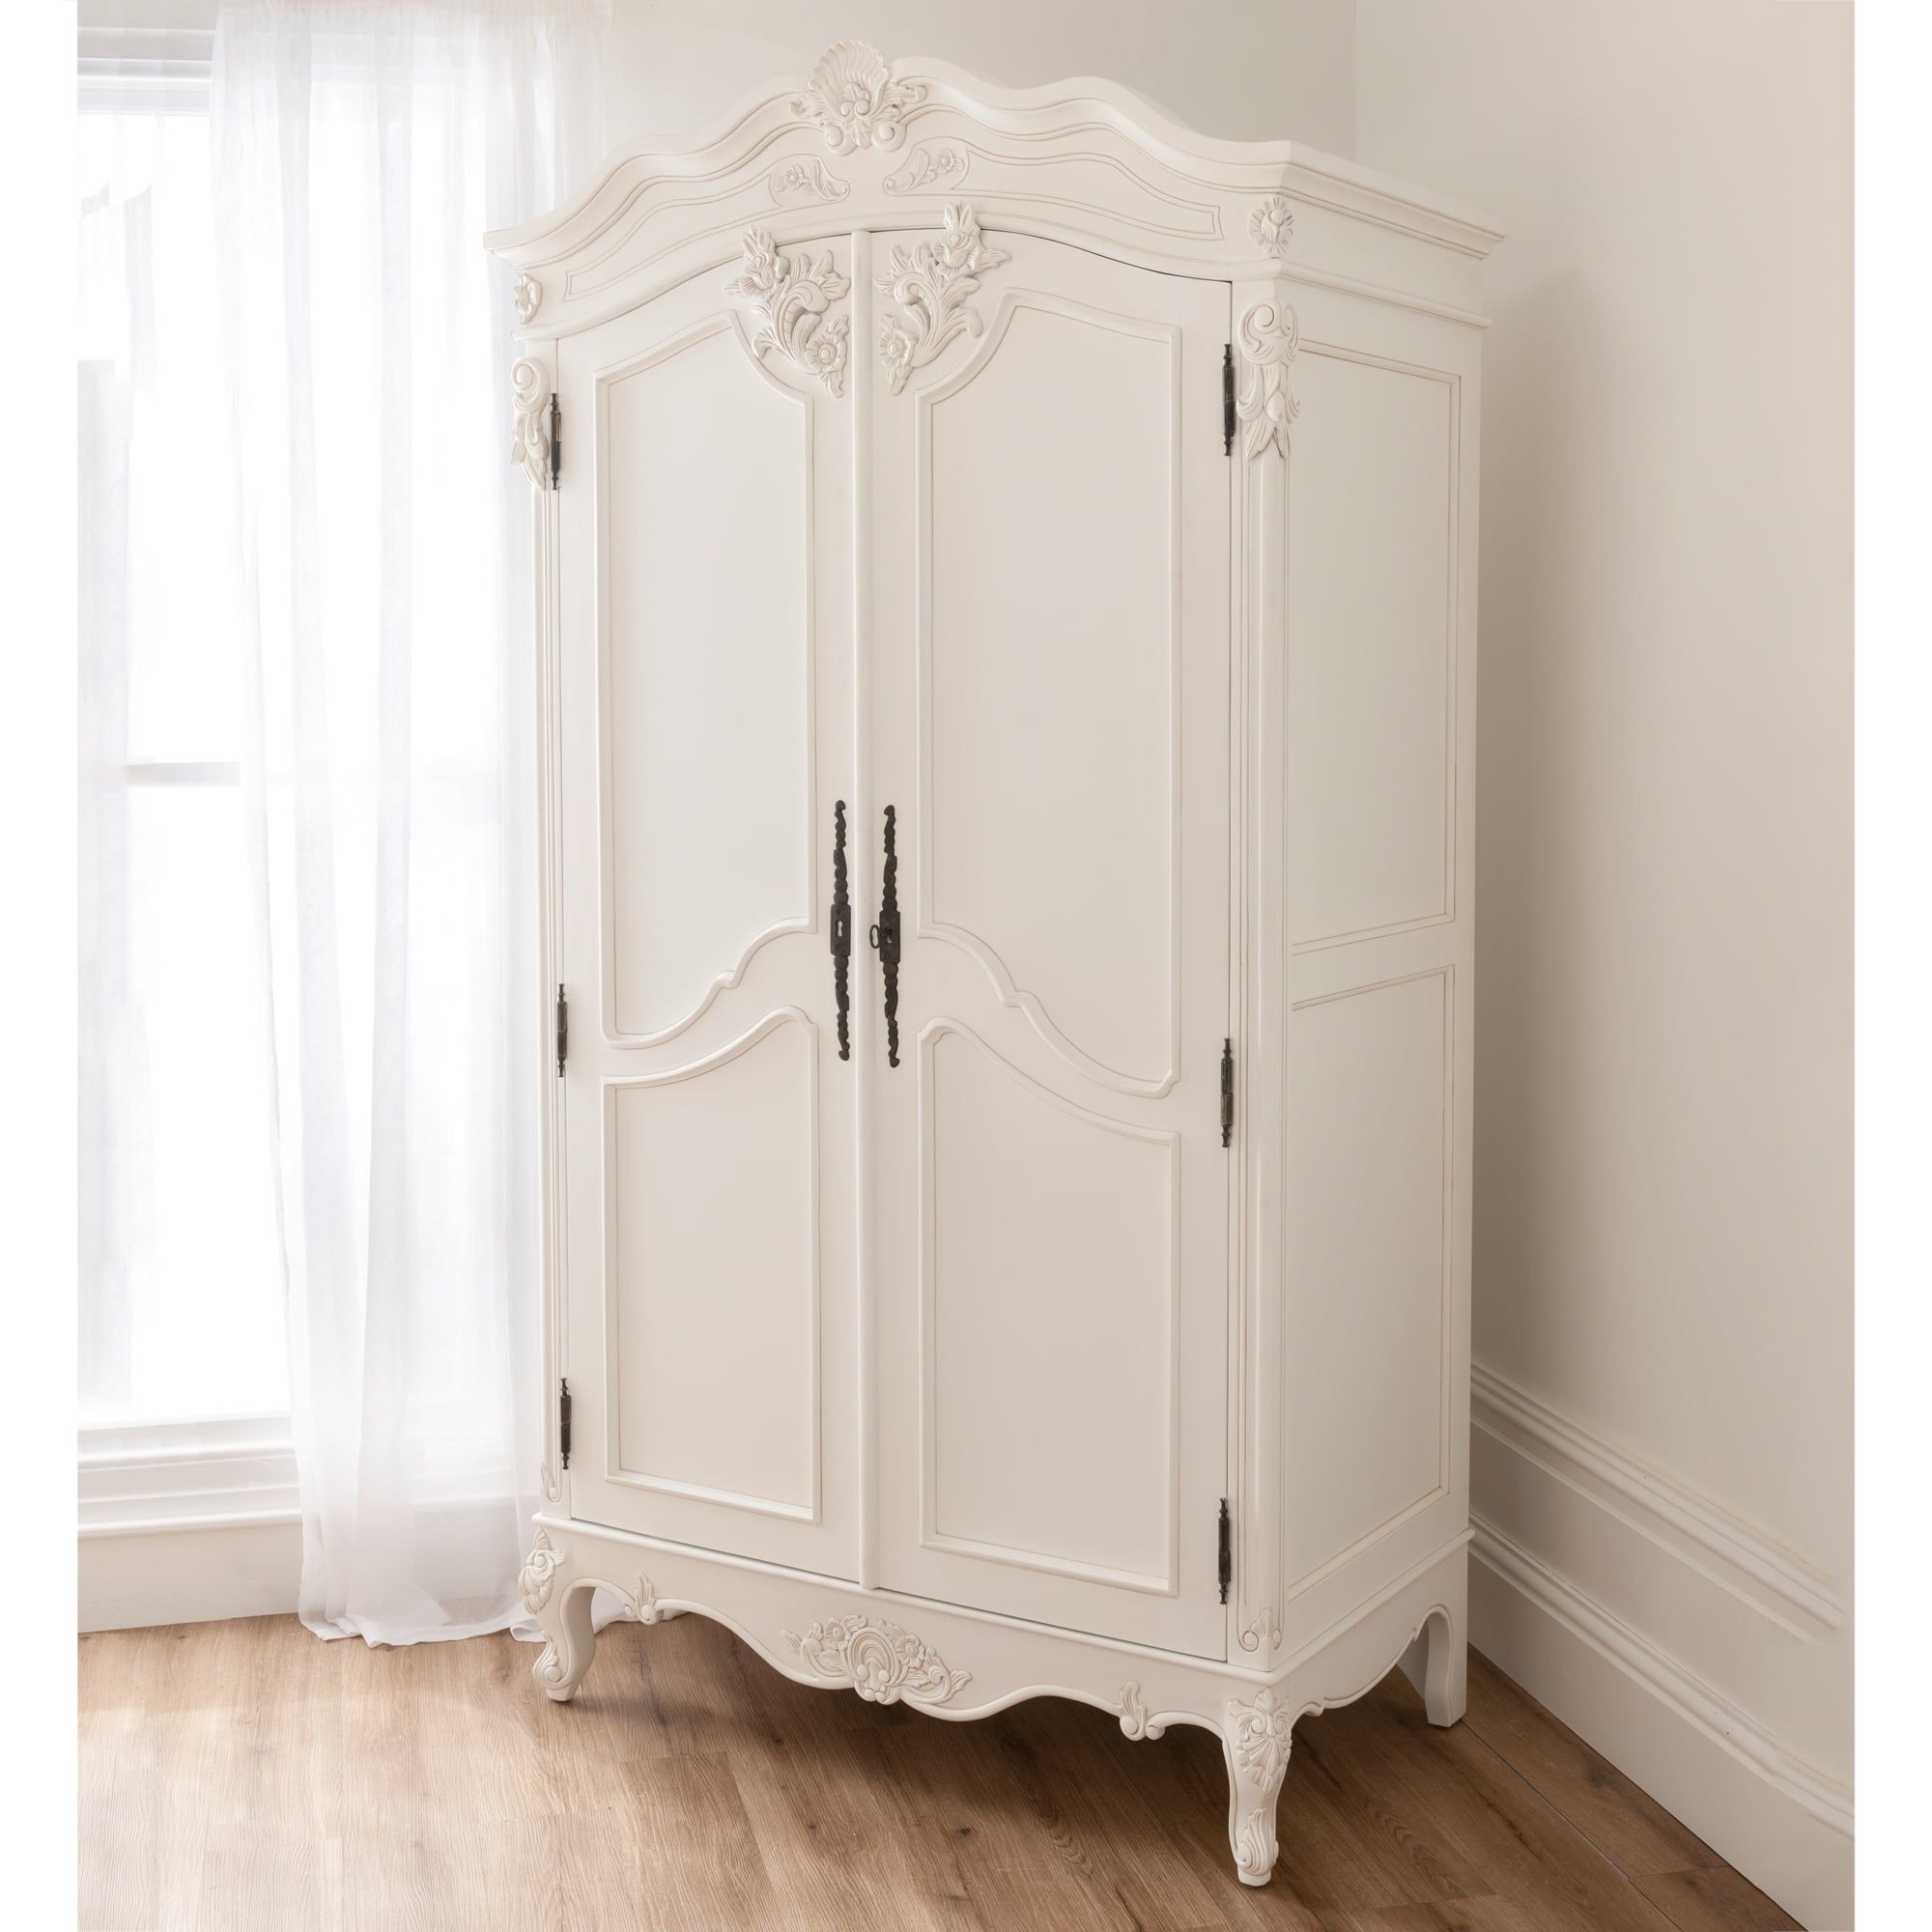 Baroque Antique French Wardrobe Is Available Online At Homesdirect365 Within White Antique Wardrobes (View 9 of 15)